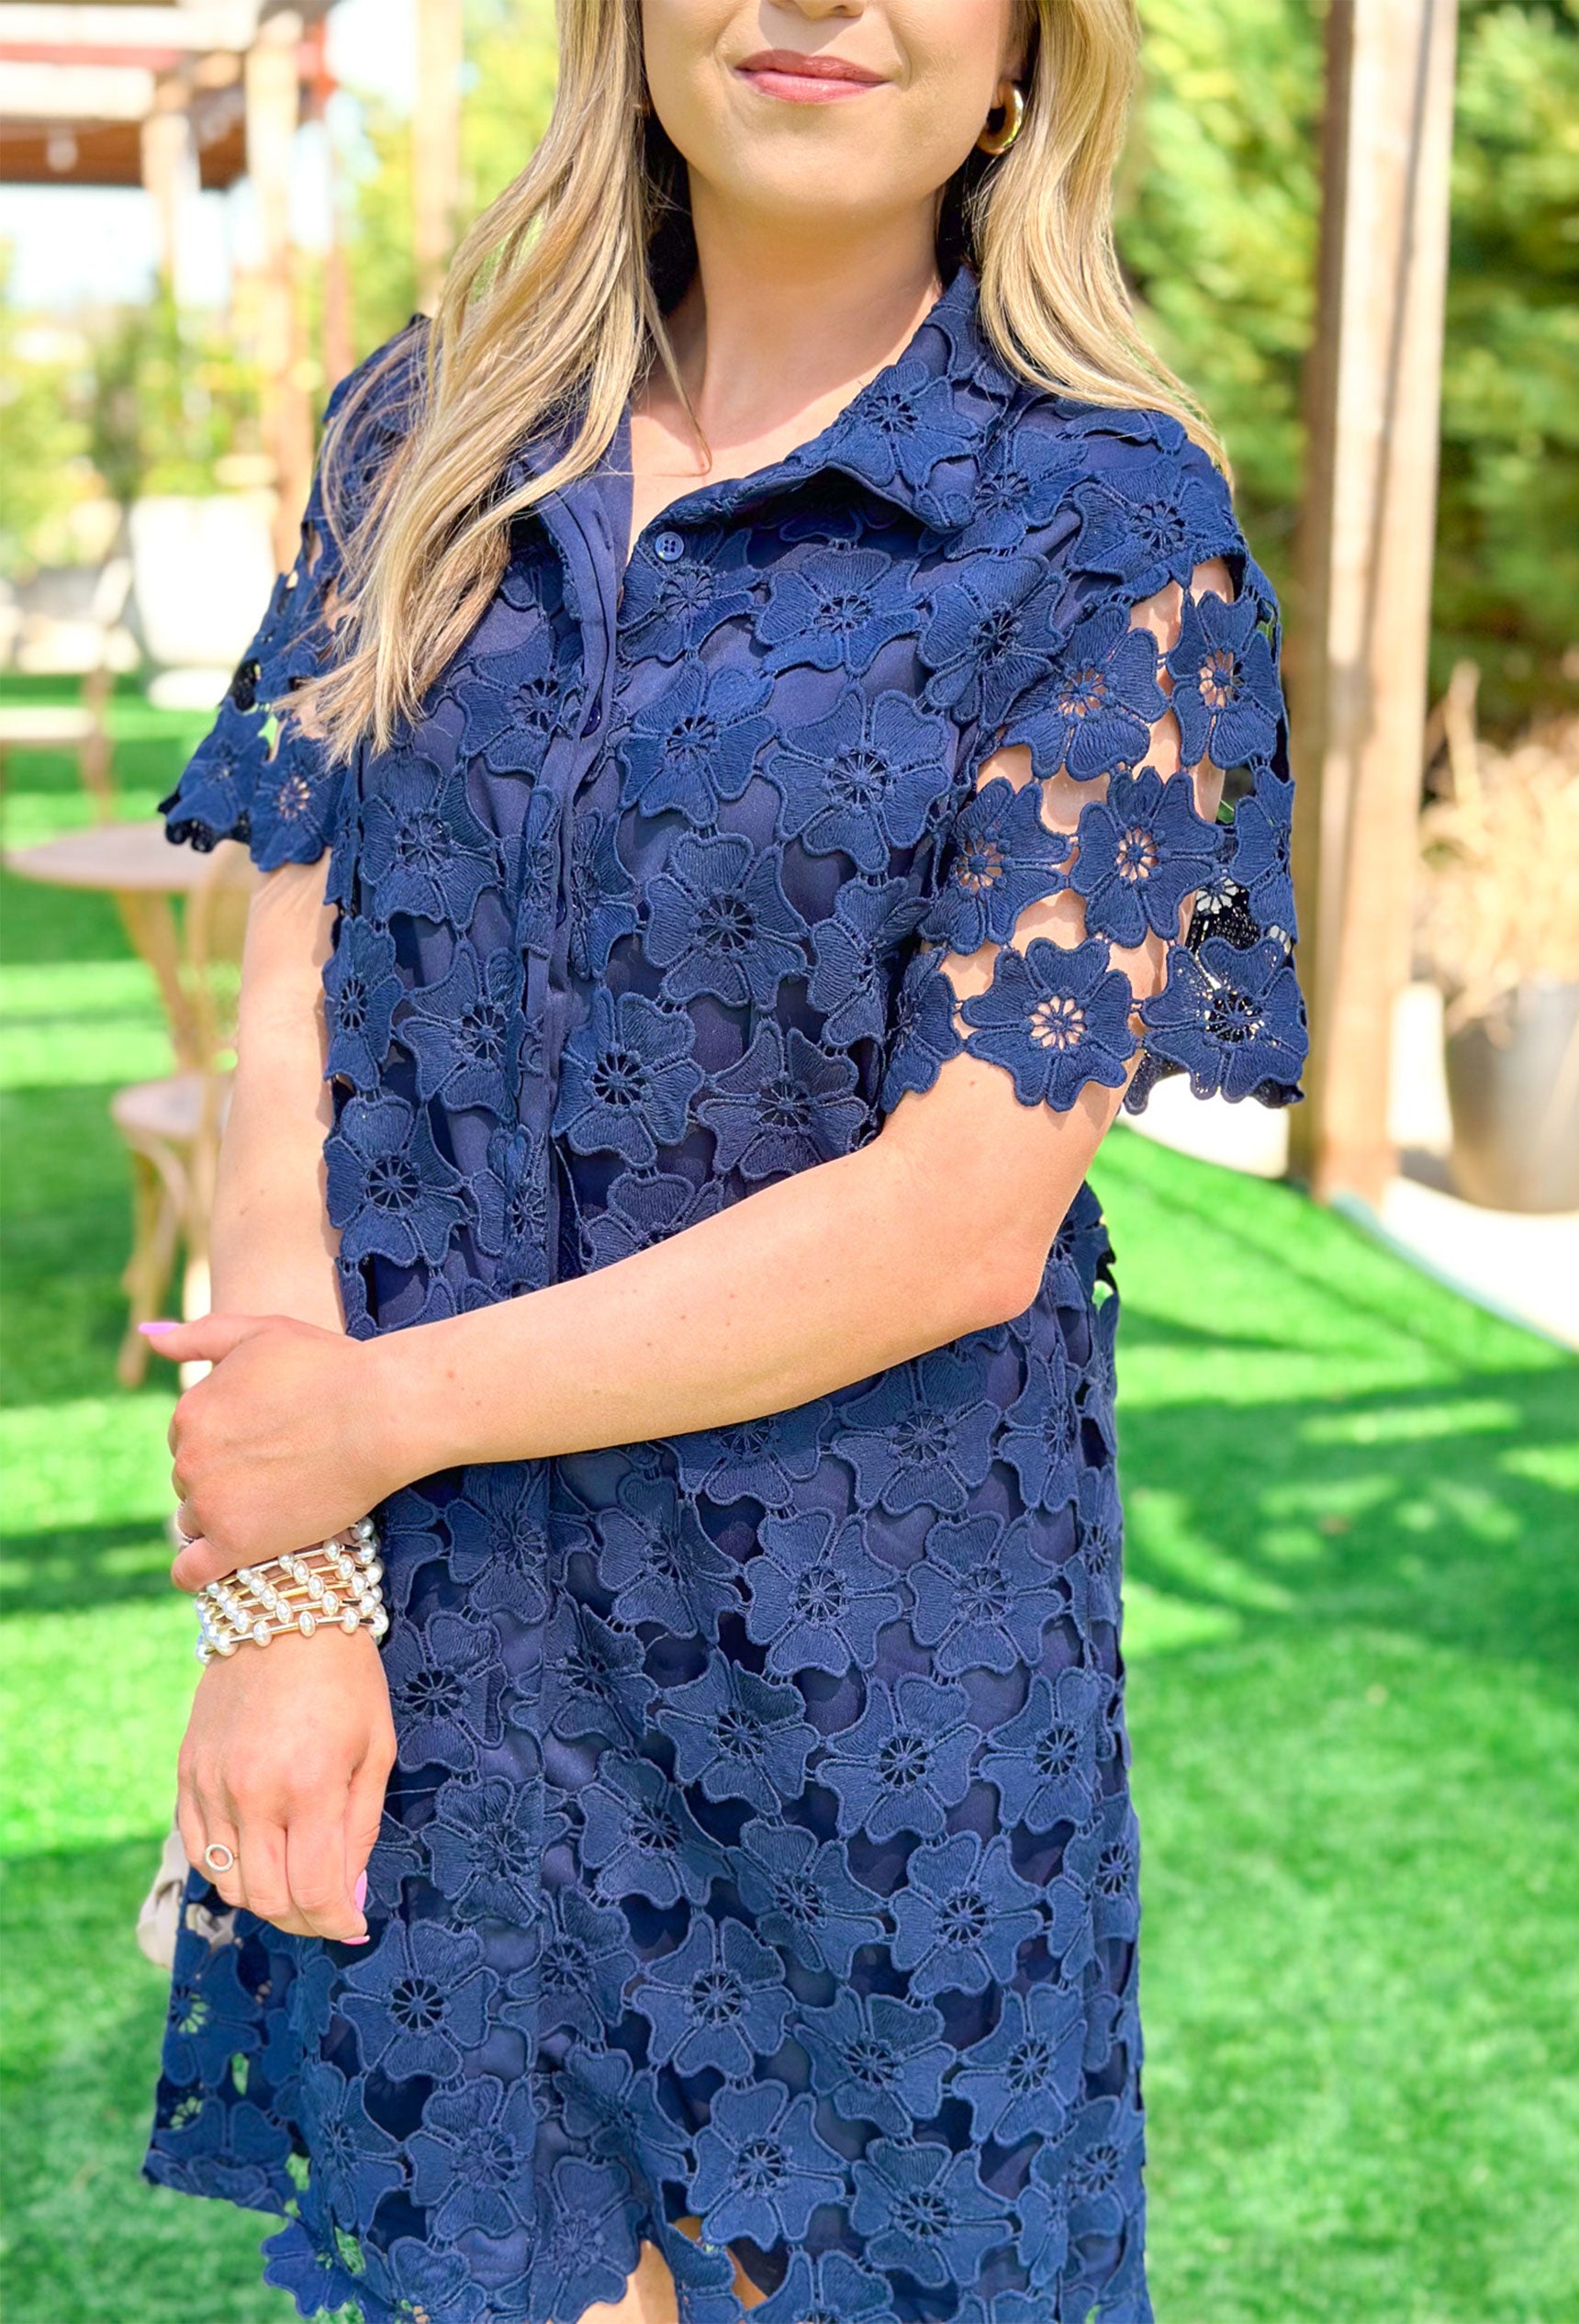 Tea At The Plaza Dress, short sleeve floral lace button up dress in navy